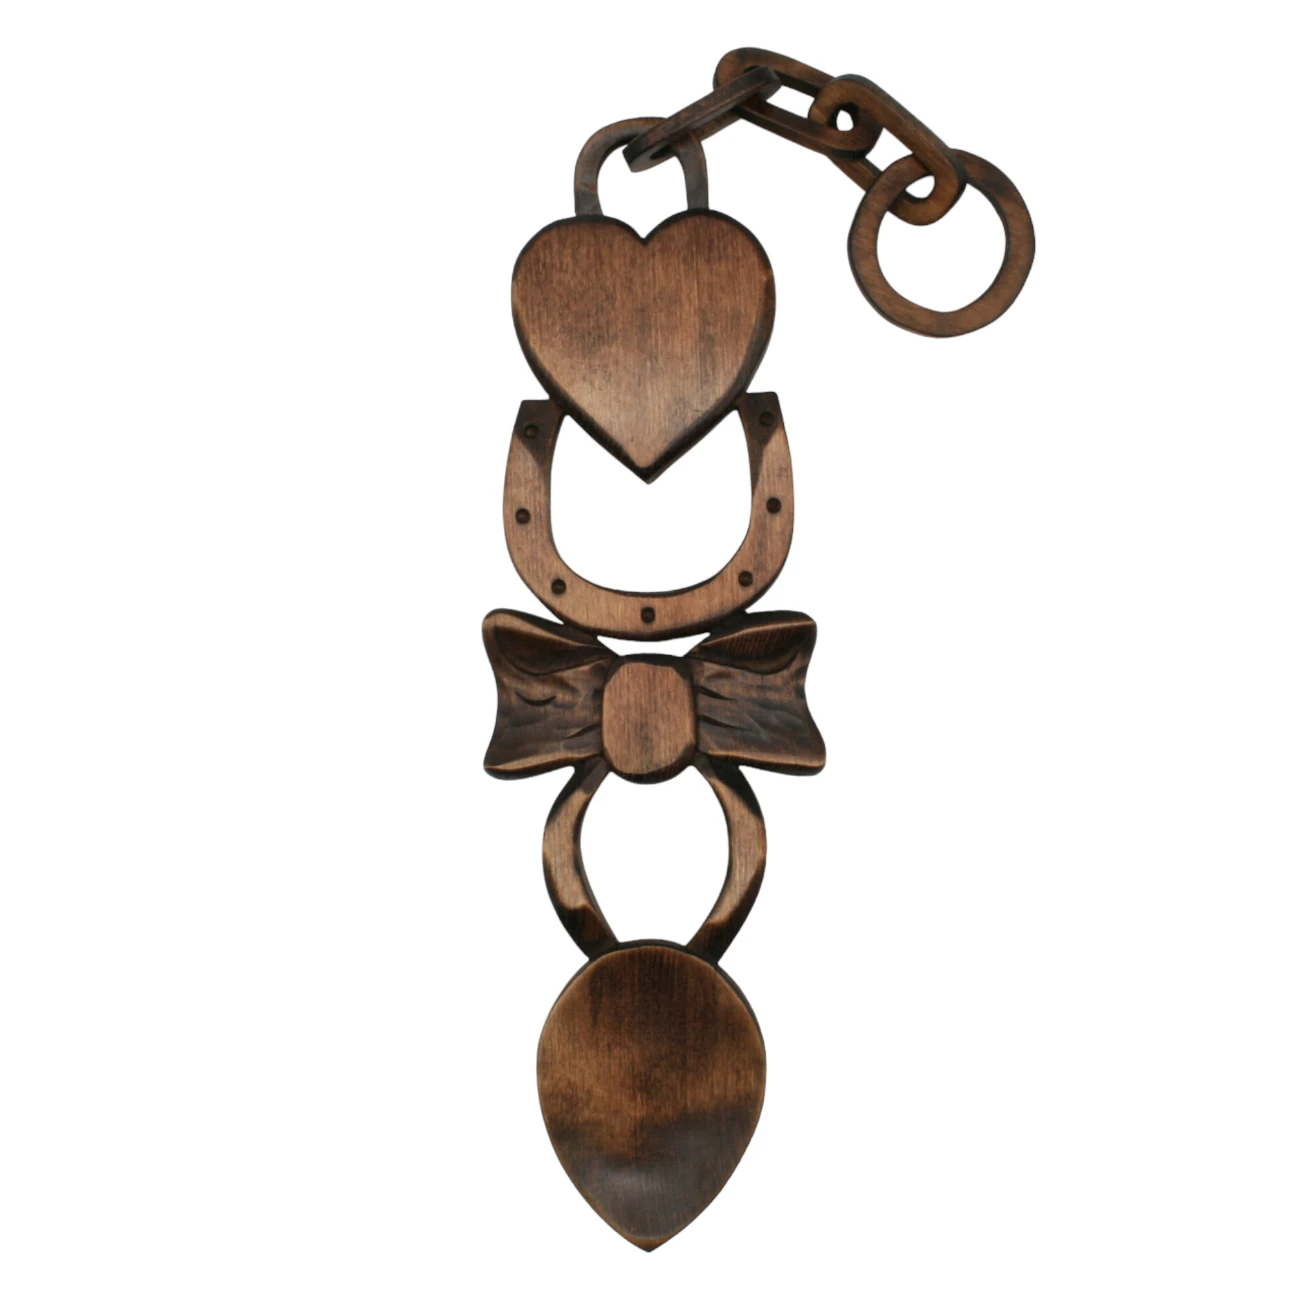 An image of a lovespoon titled Heart, Horseshoe & Bow